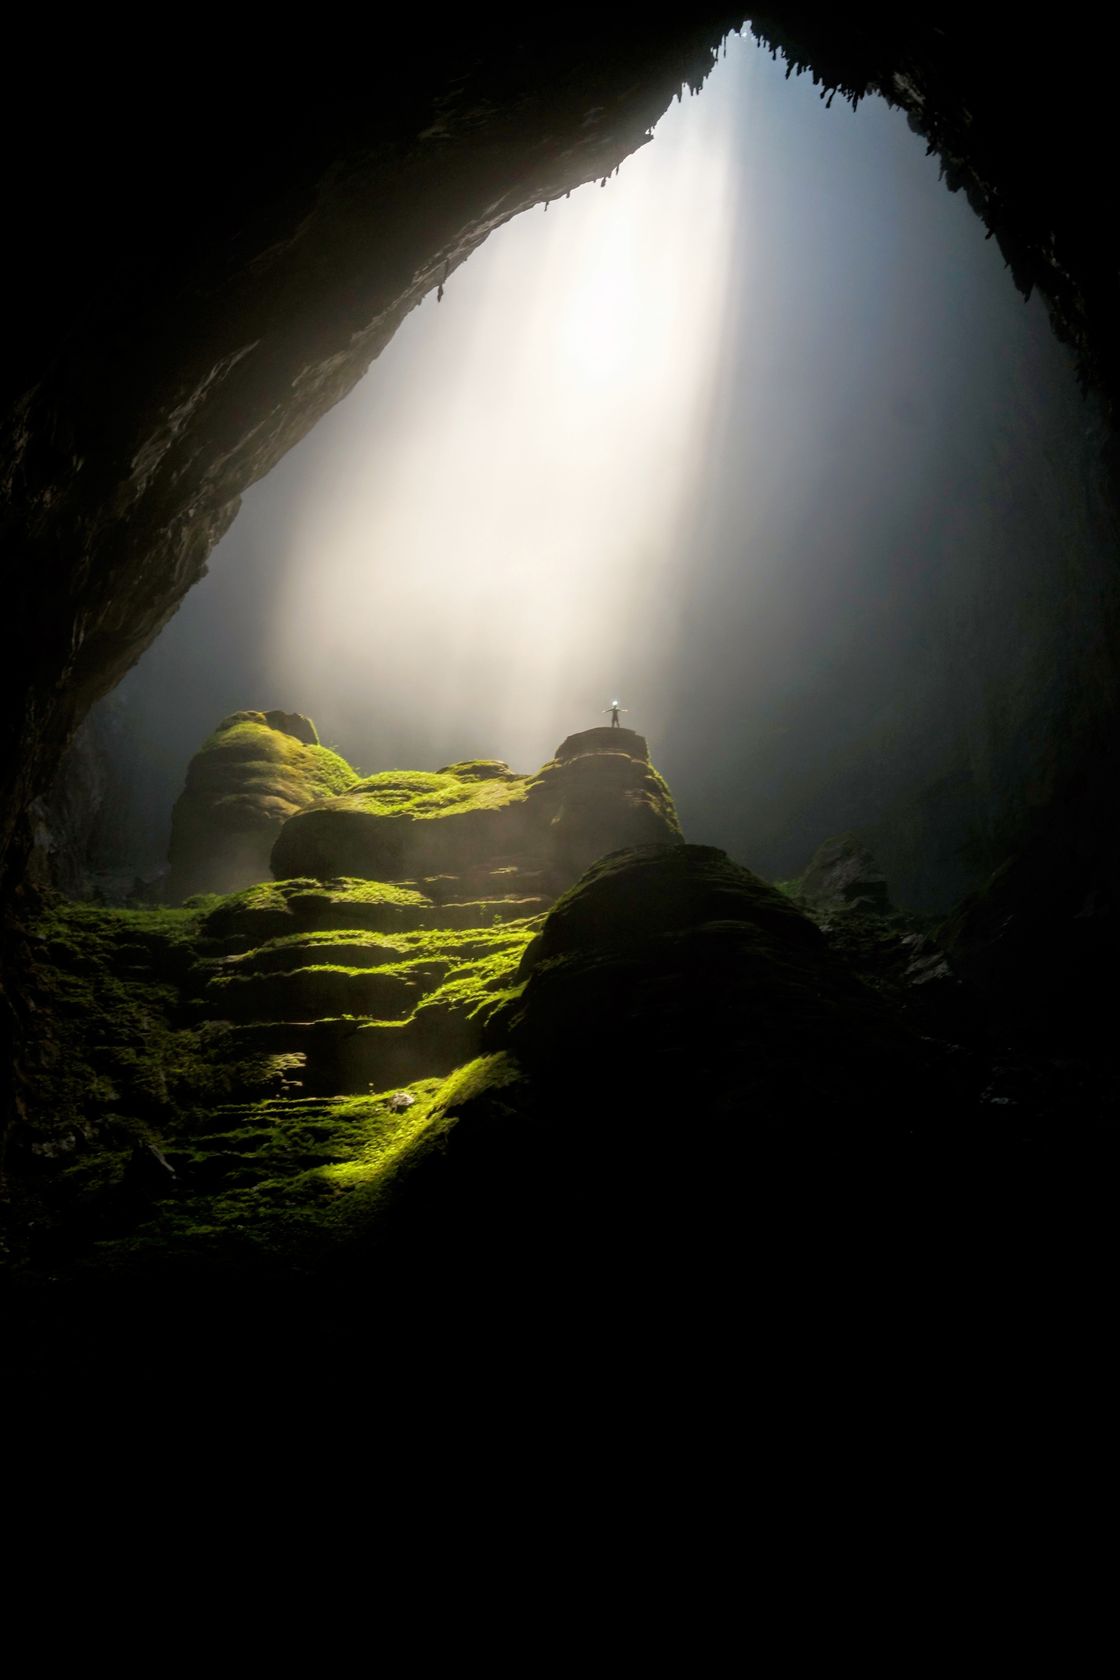 Lonely person standing on moss-covered rocks in a beam of light in a huge cavern.